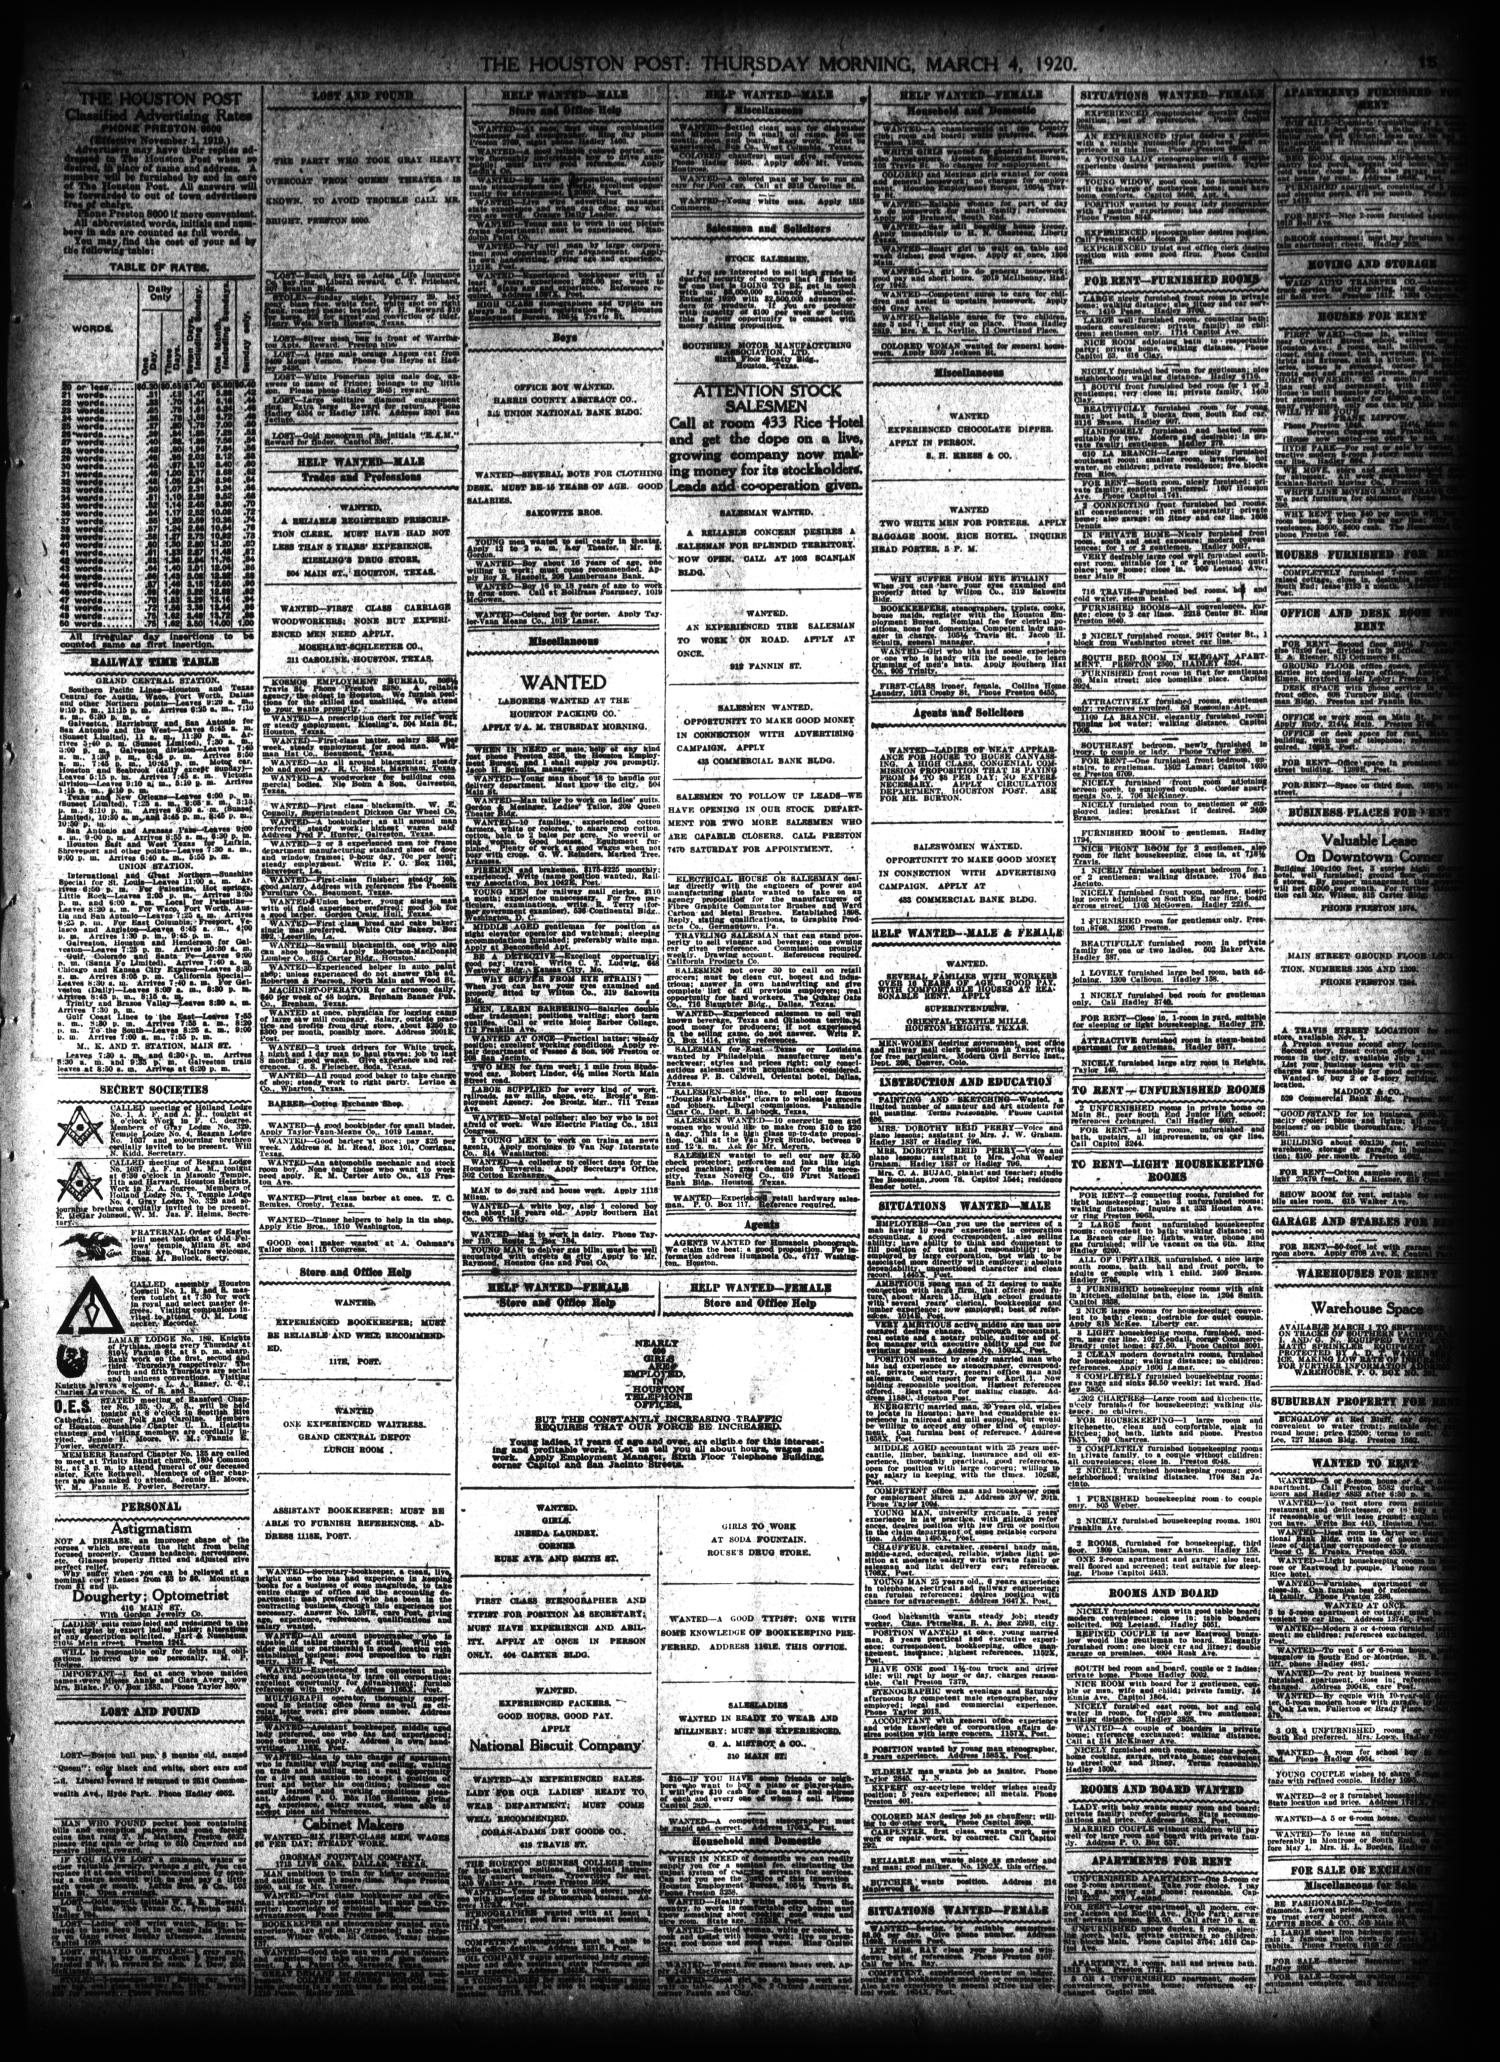 The Houston Post. (Houston, Tex.), Vol. 35, No. 335, Ed. 1 Thursday, March  4, 1920 - Page 15 of 20 - The Portal to Texas History